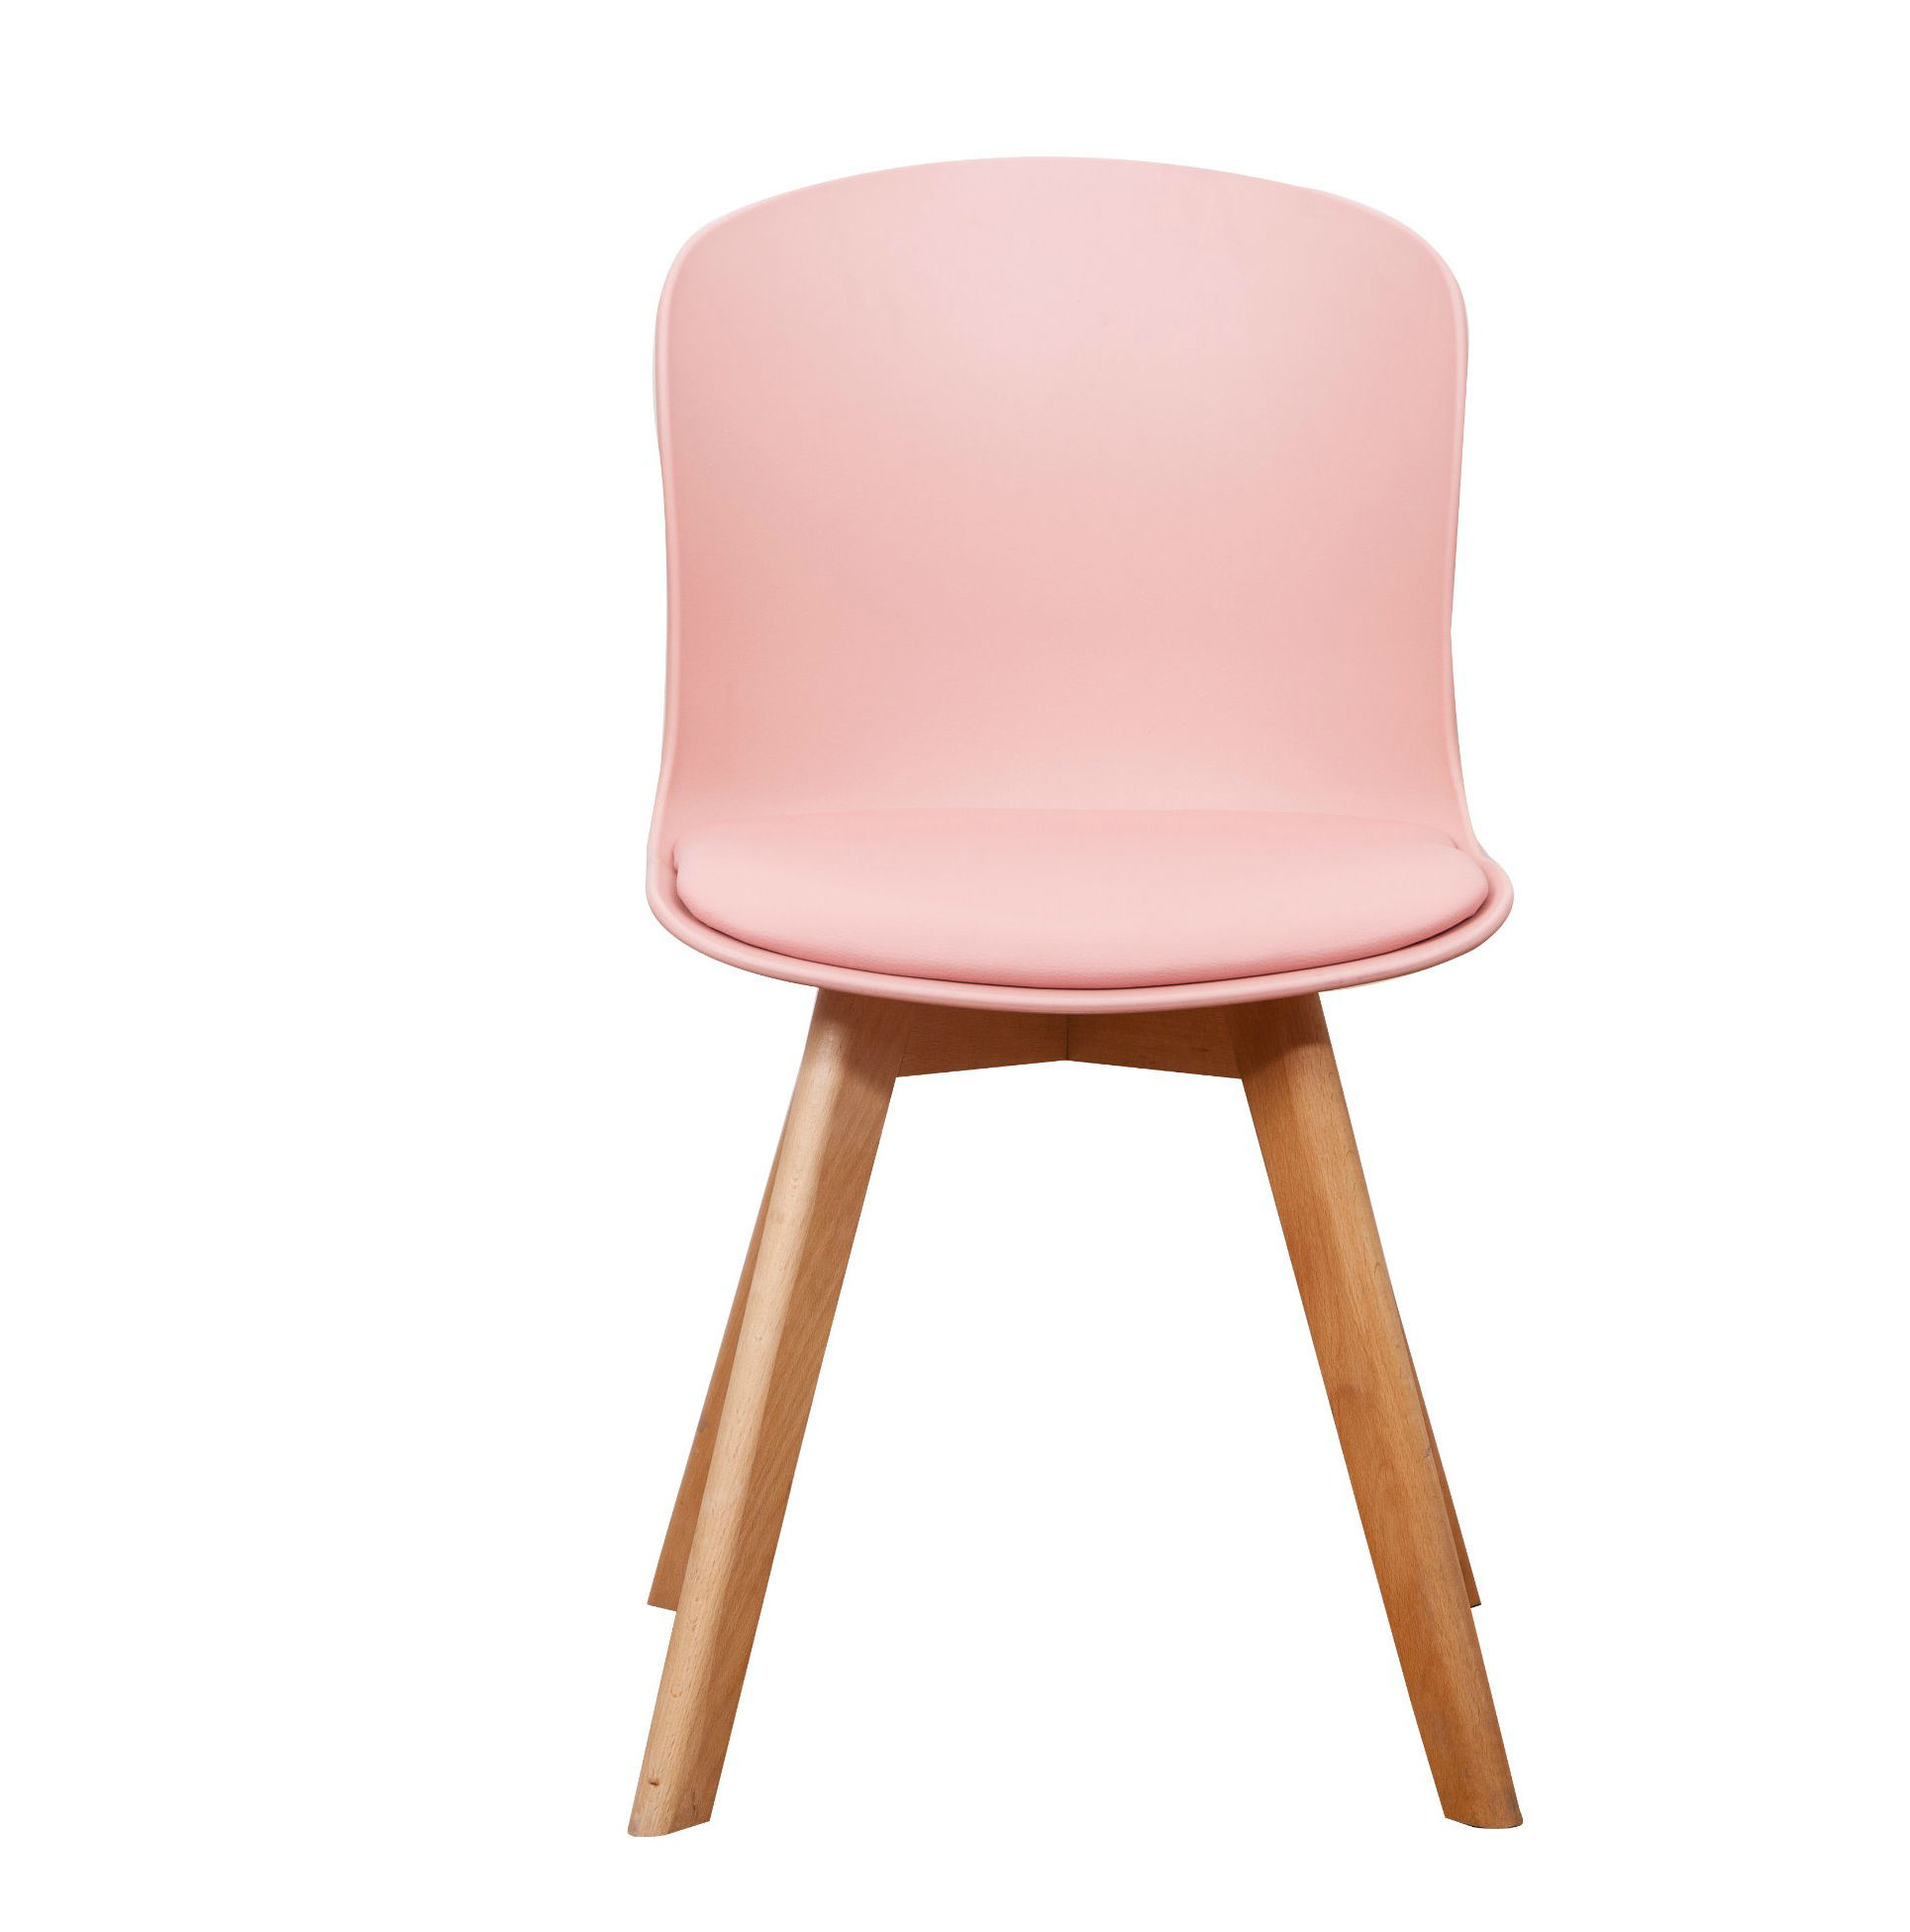 Modern Colored PP Plastic Wooden Dining Chair